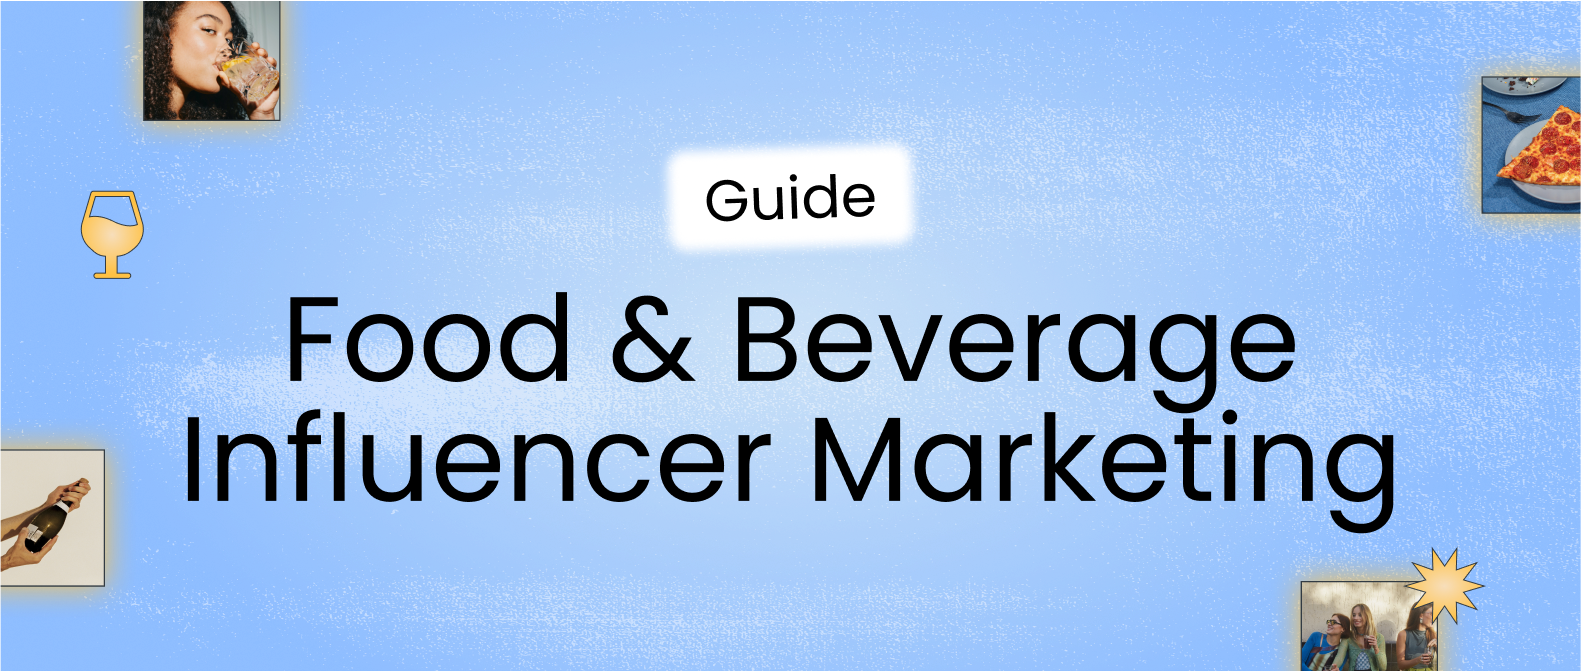 Free influencer marketing guide for food and beverage brands.